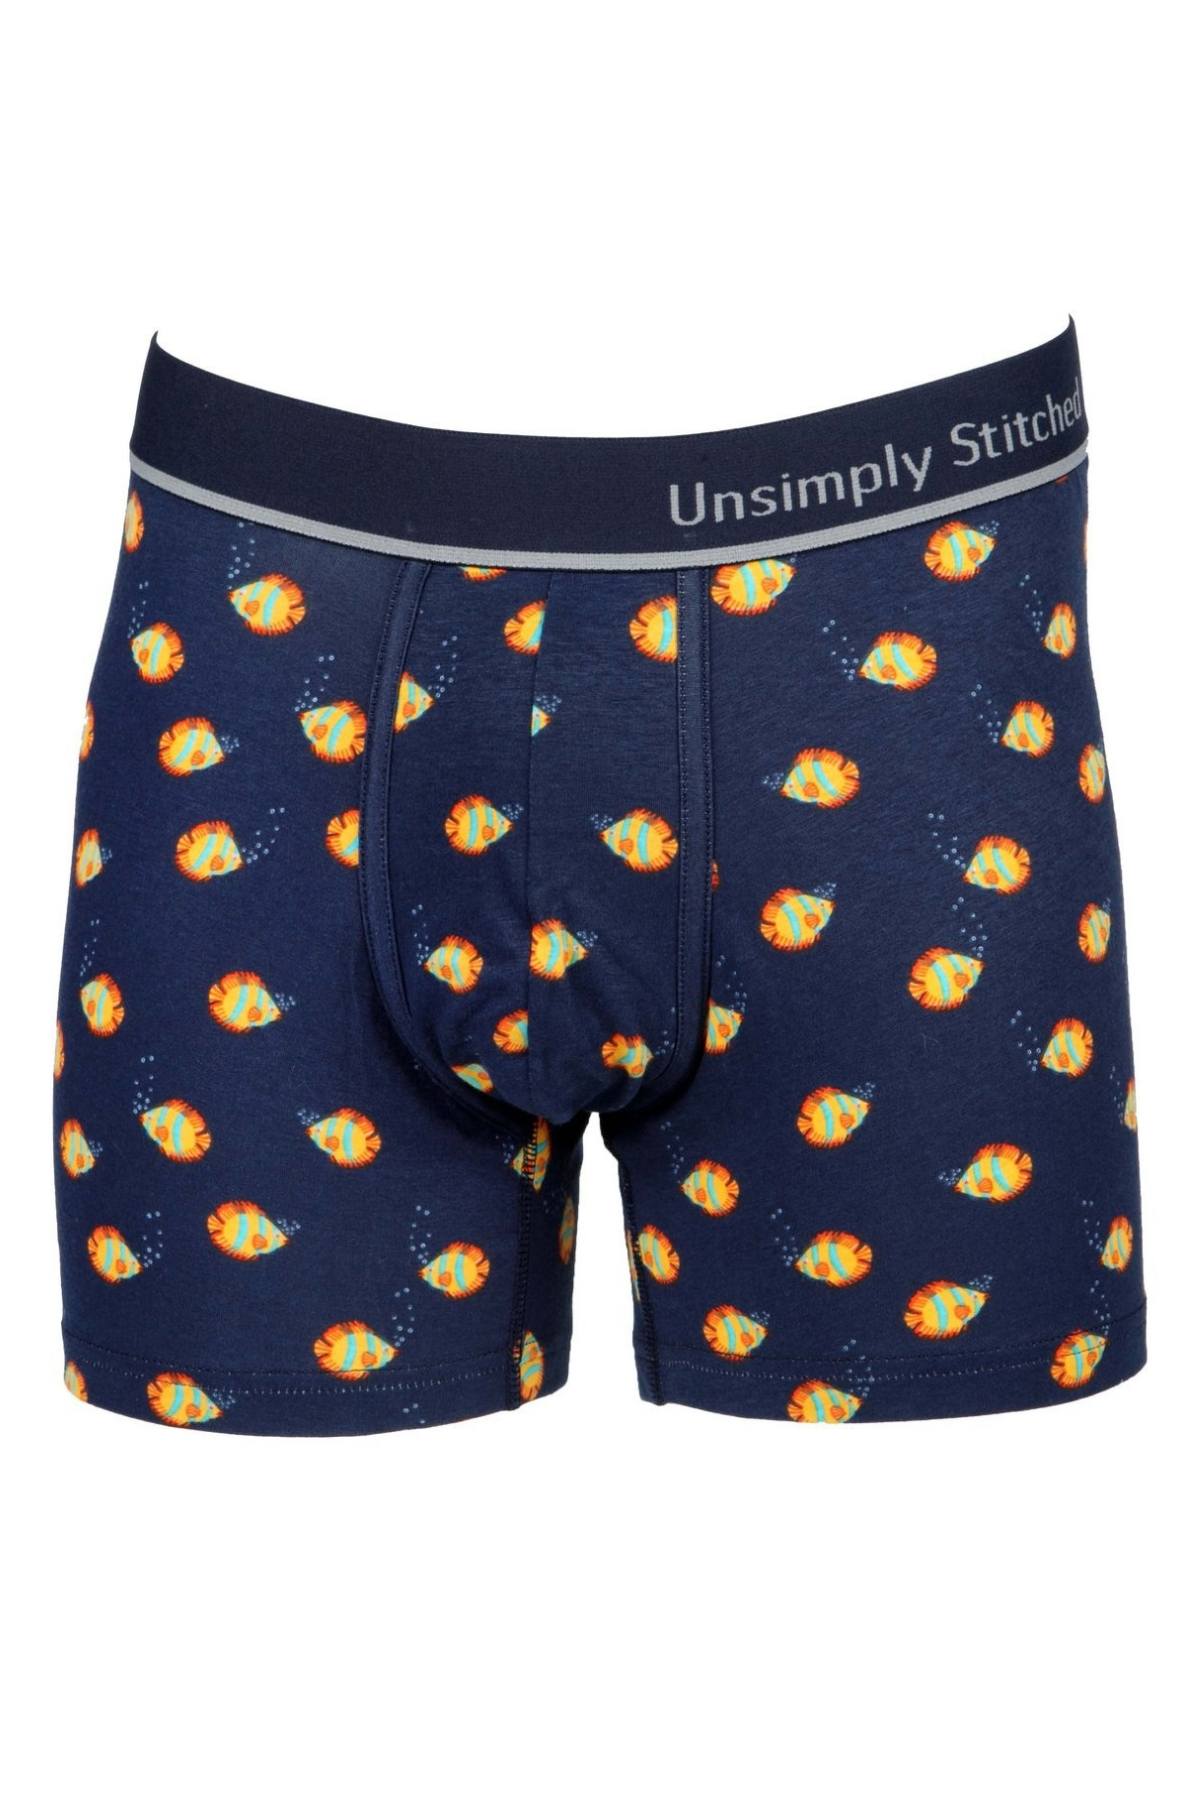 Unsimply Stitched Navy-Blue Fish-Bubbles Boxer Brief